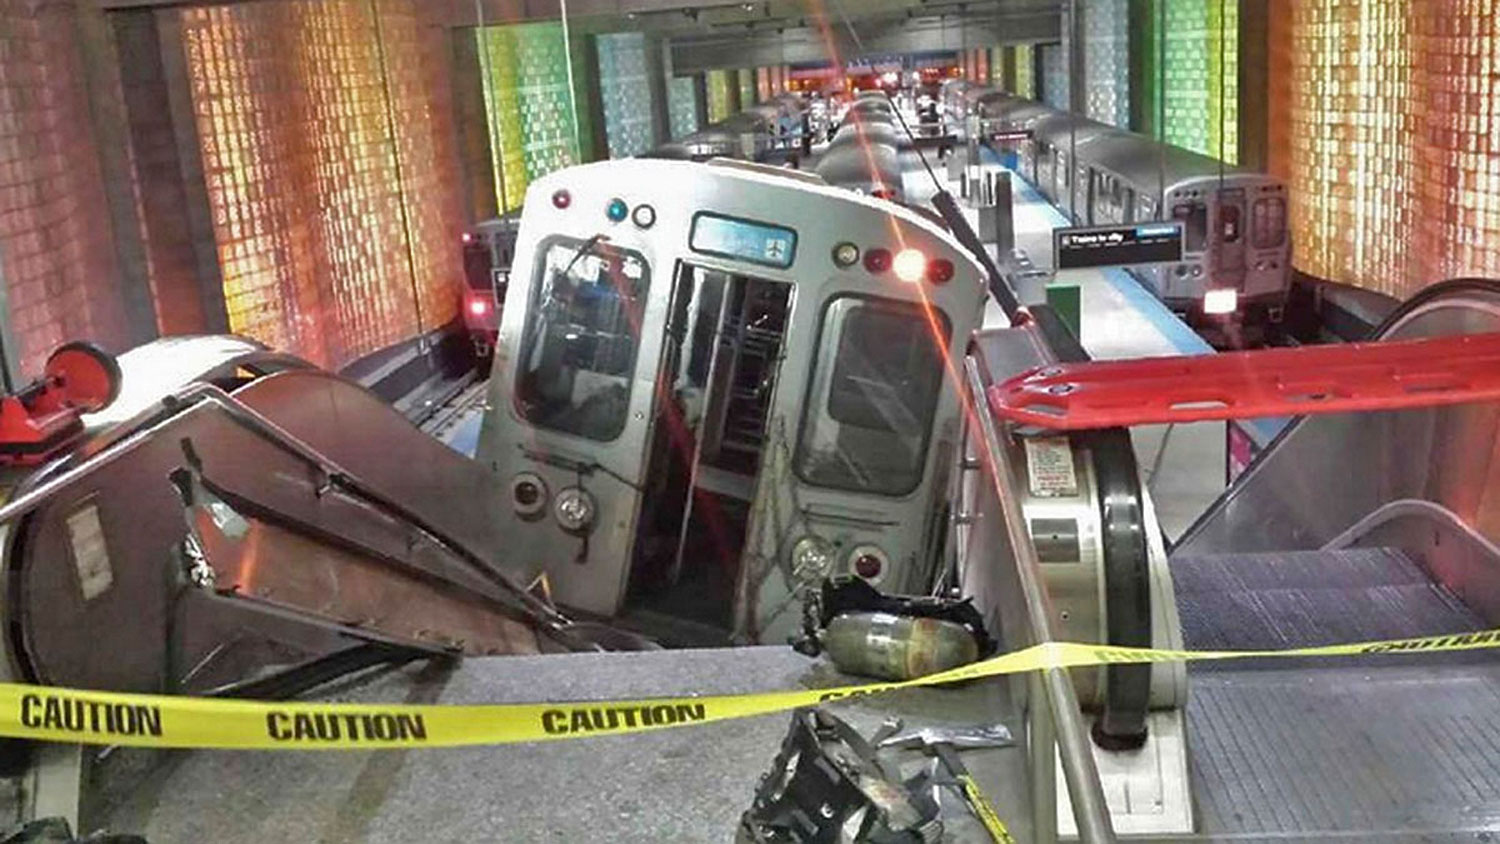 A handout photo shows a derailed commuter train resting on an escalator at O'Hare international airport in Chicago